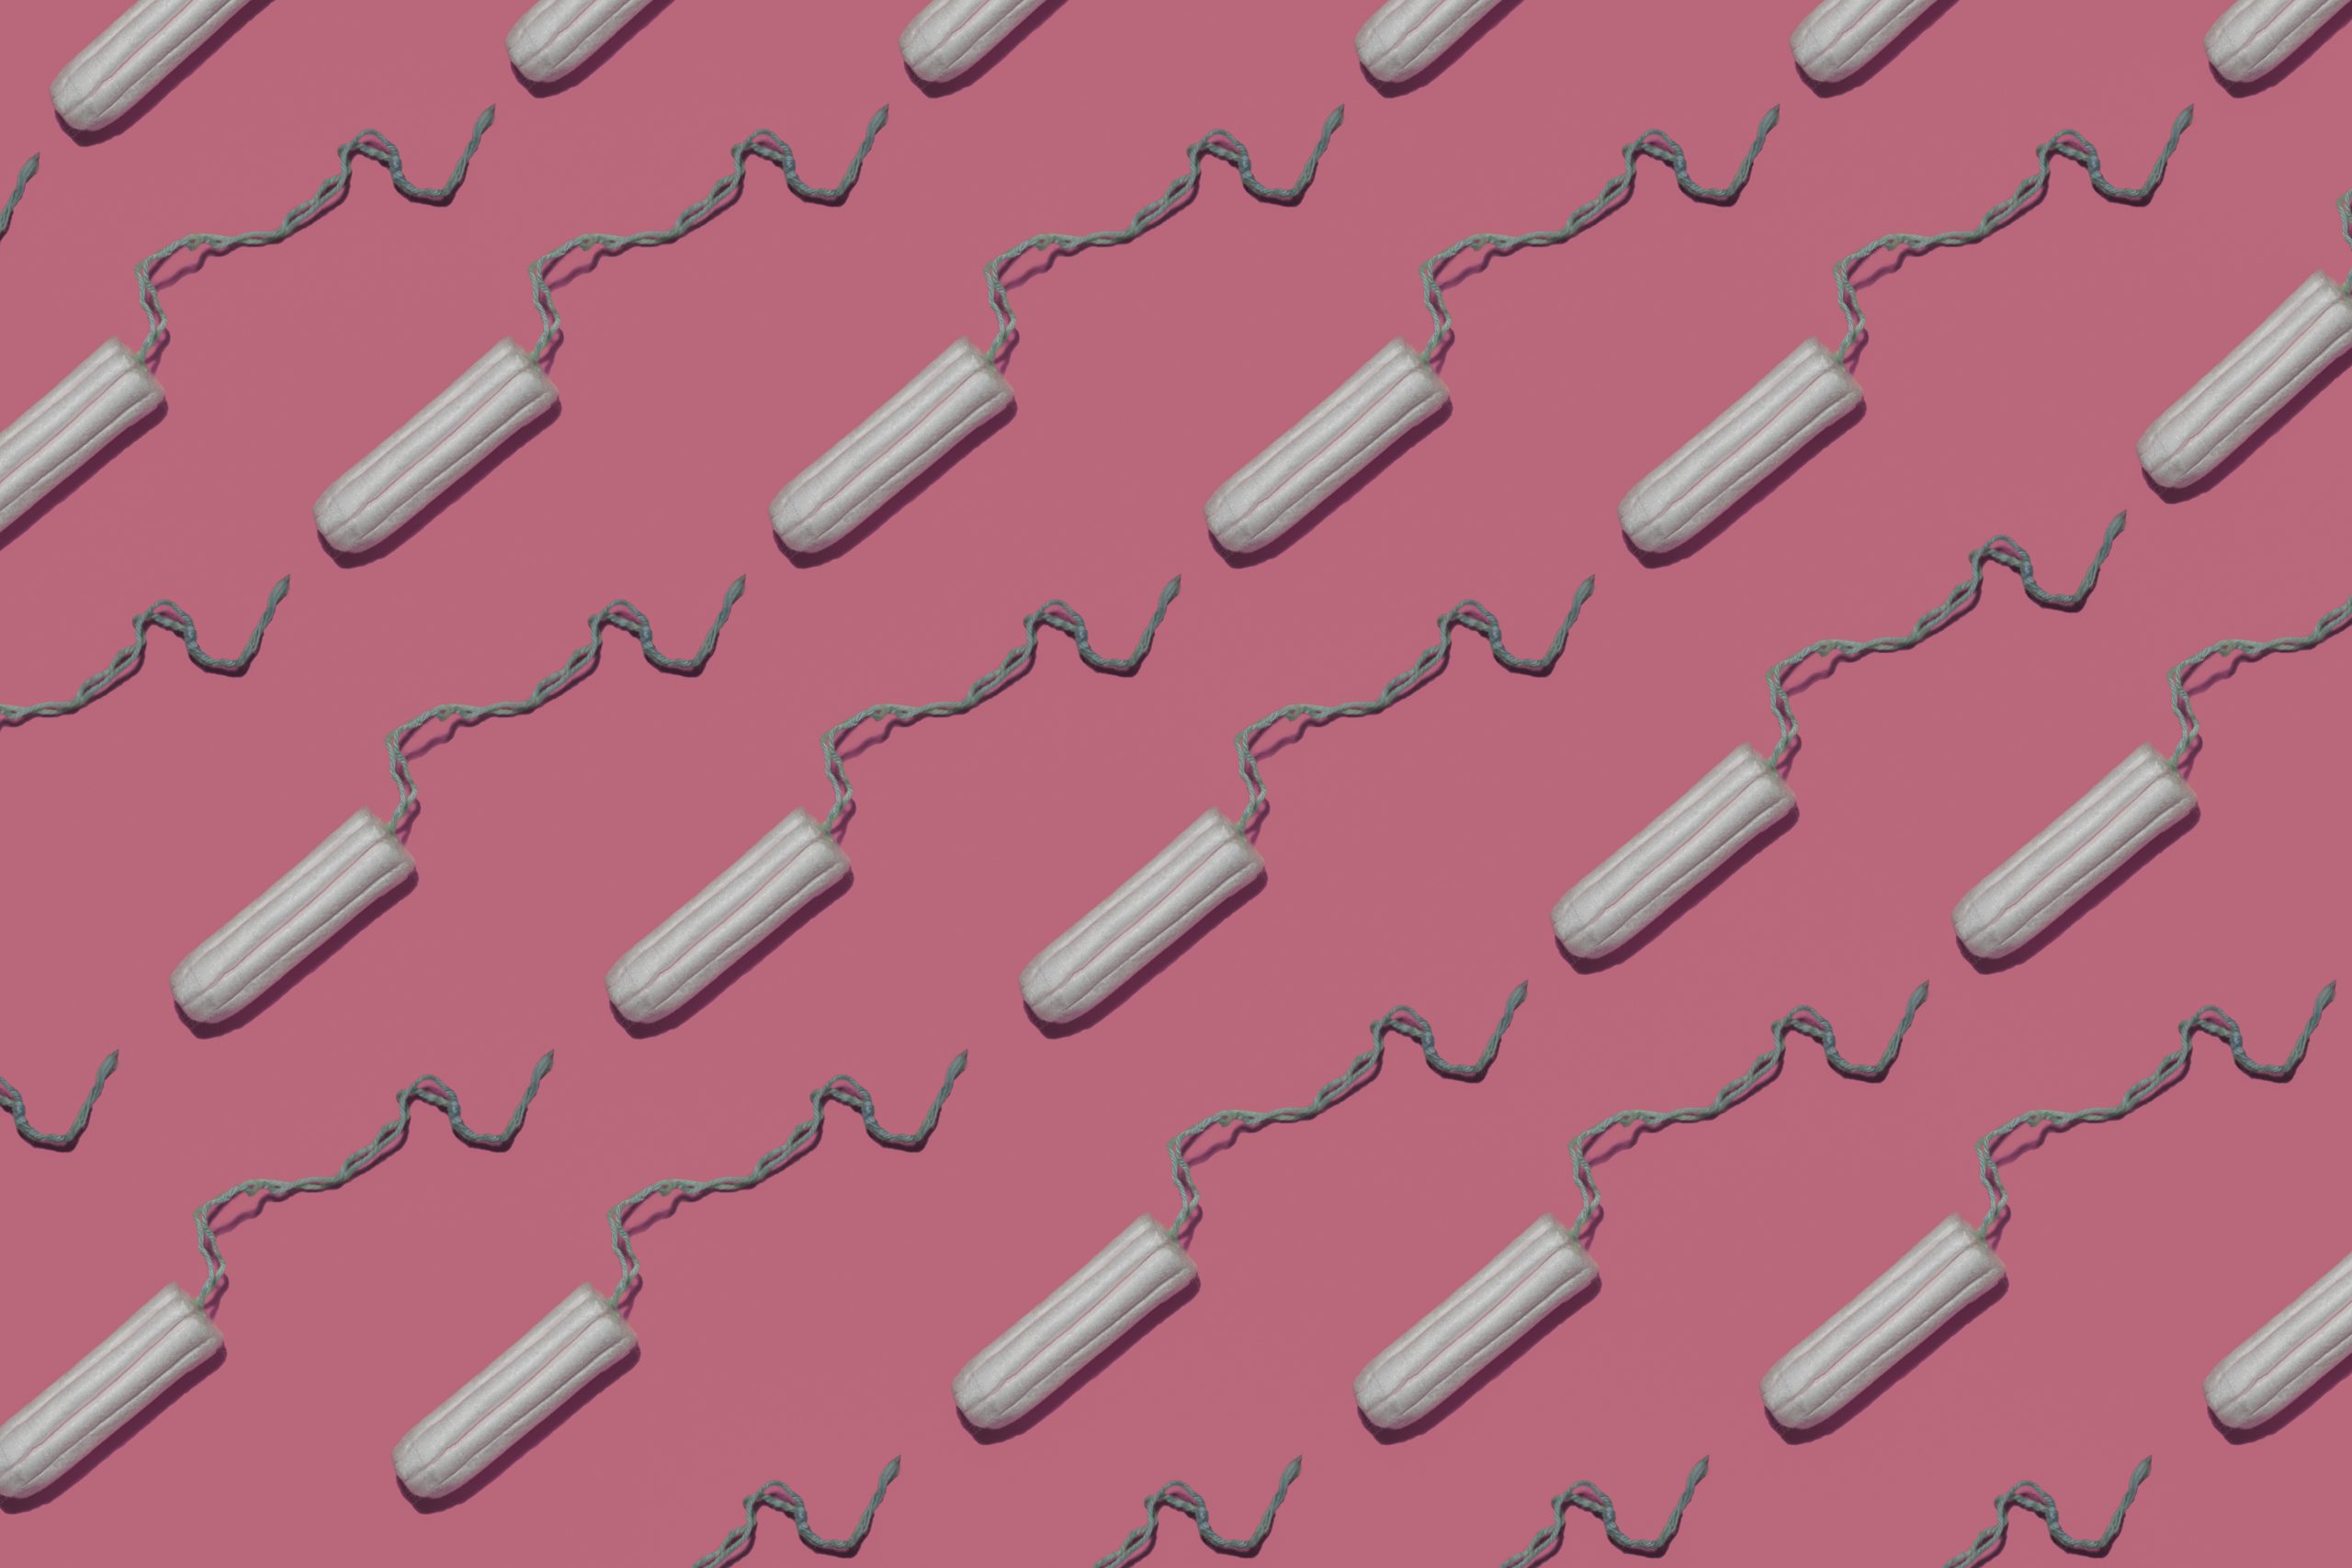 Toxic Tampons Exposed